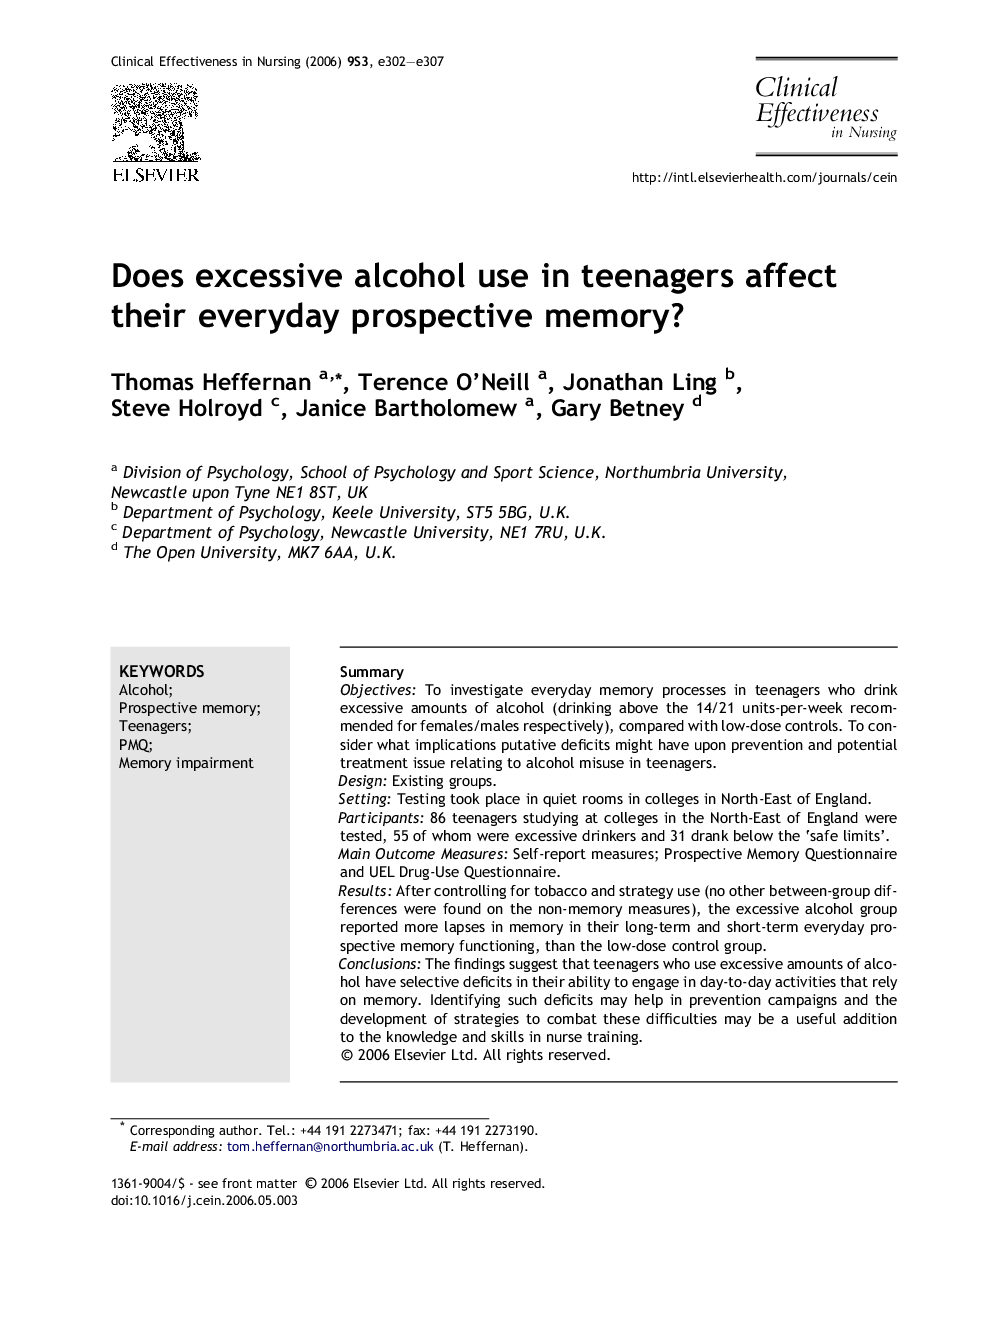 Does excessive alcohol use in teenagers affect their everyday prospective memory?